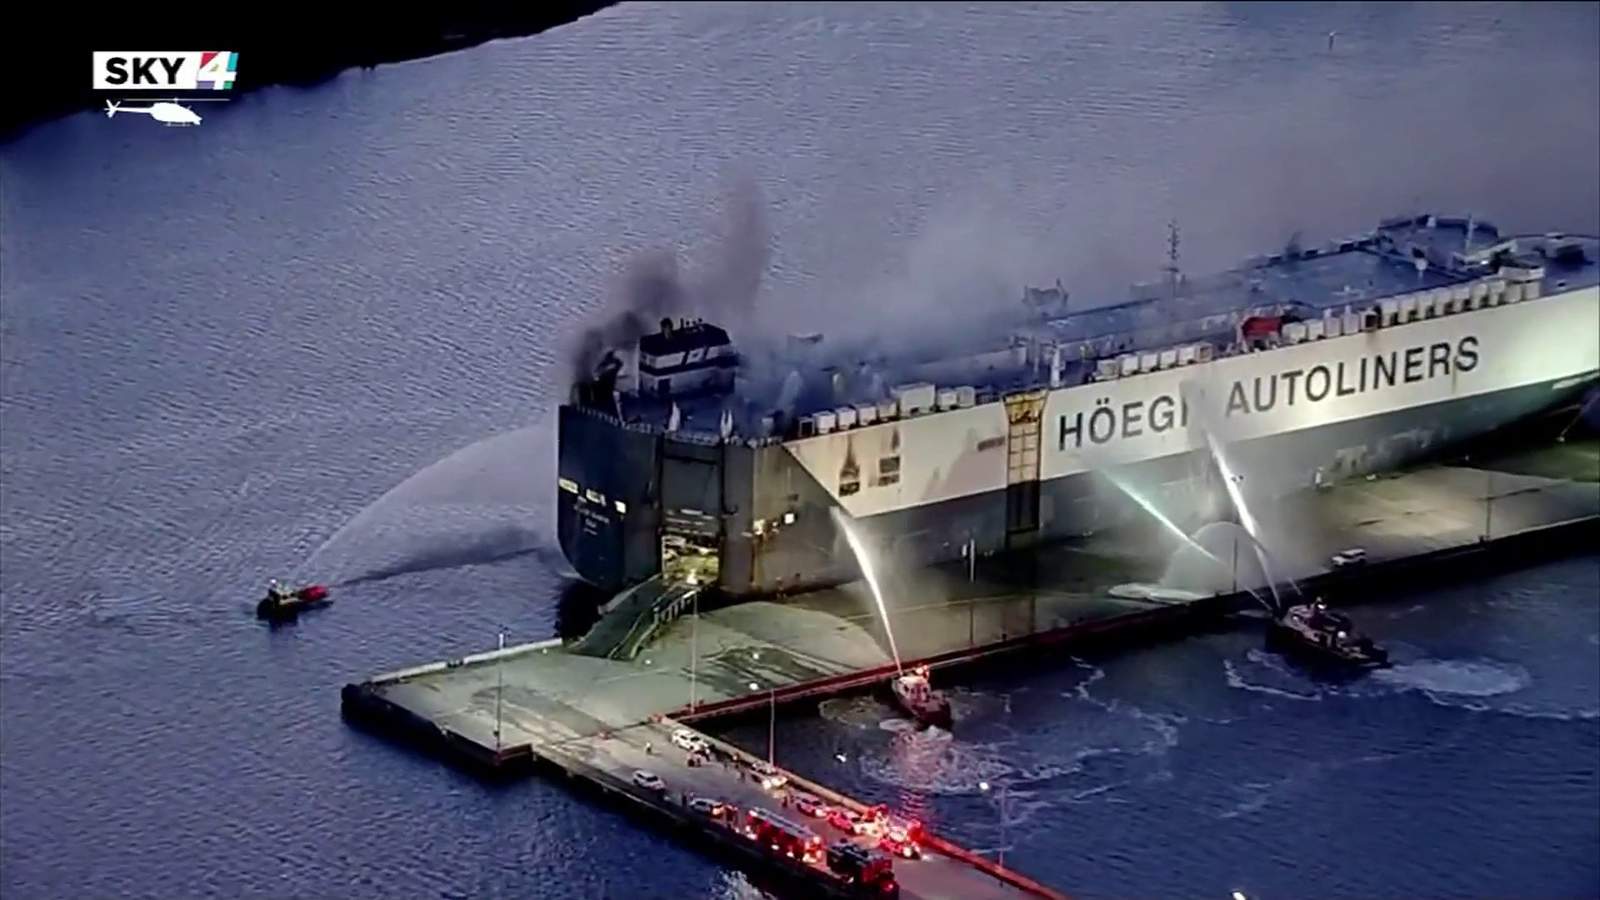 Firefighters injured in blast while battling fire aboard cargo ship